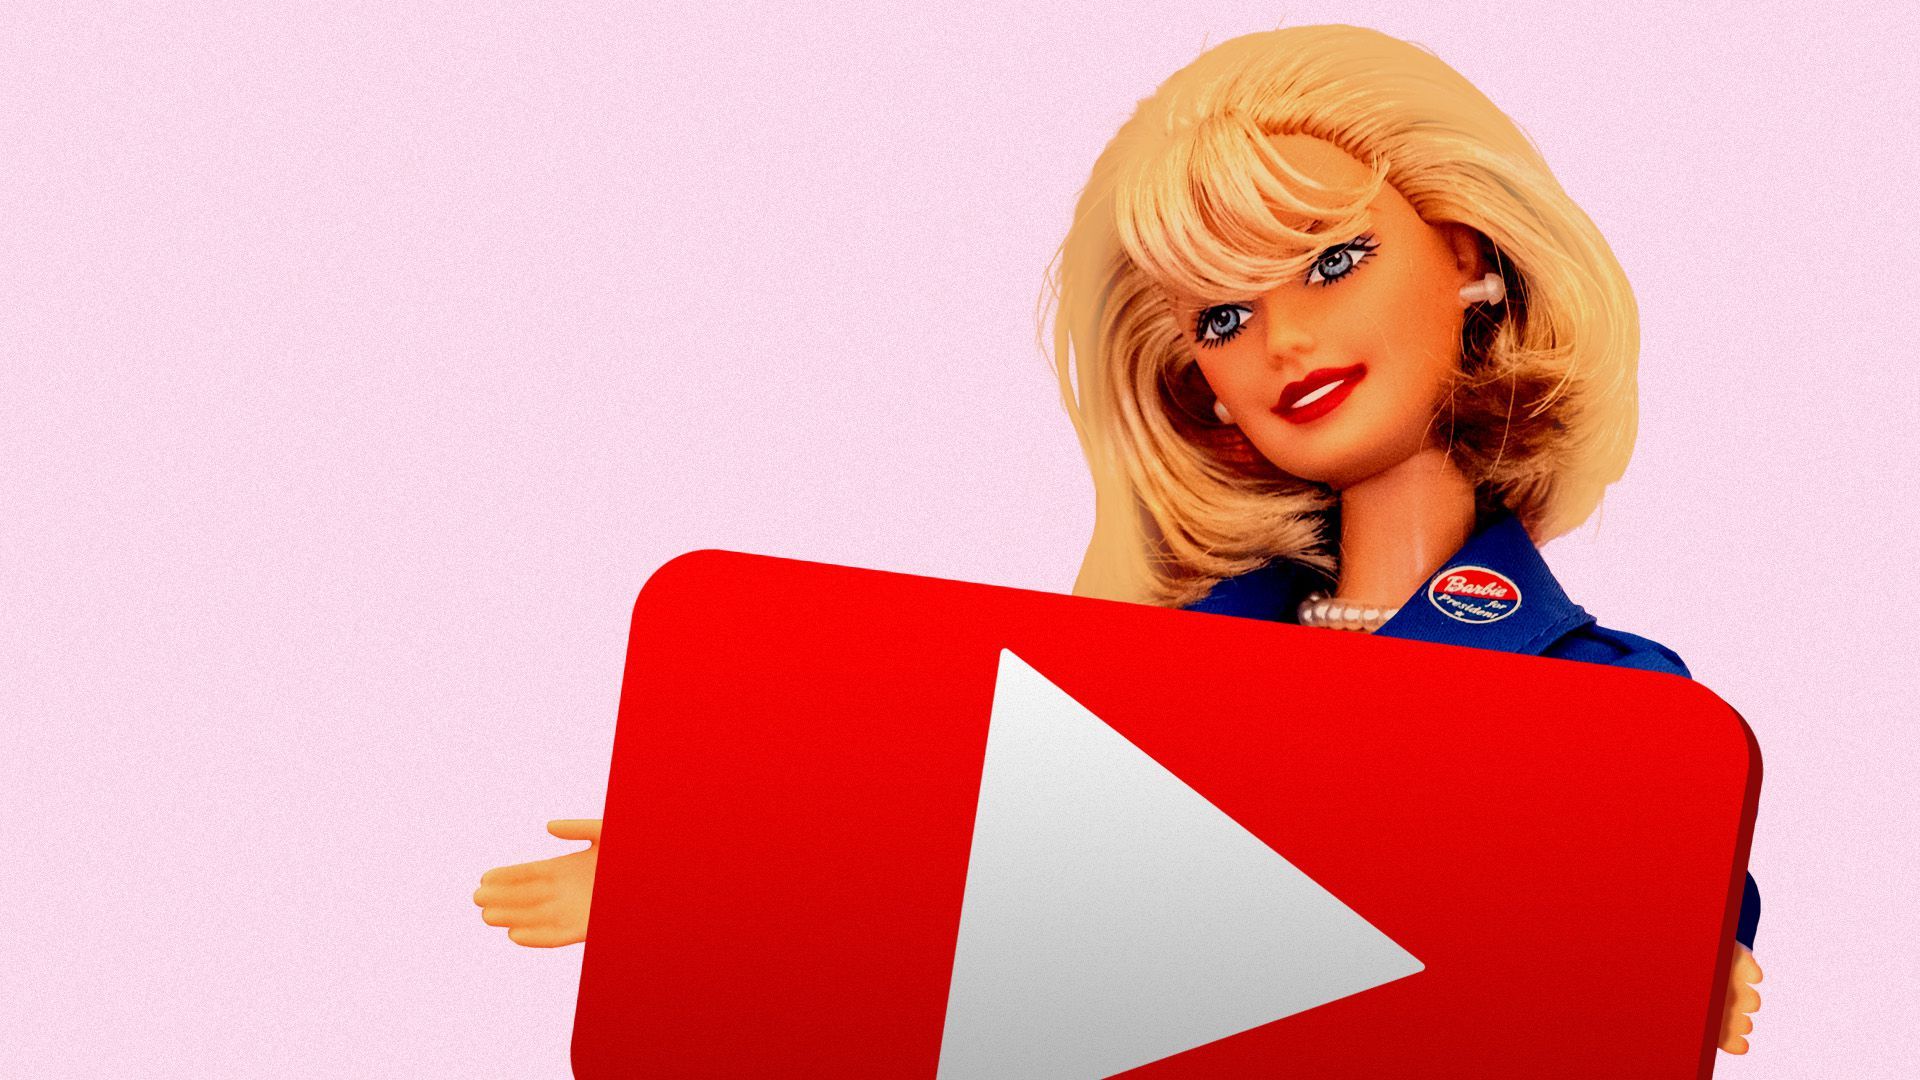 Illustration of a Barbie Doll holding a play button